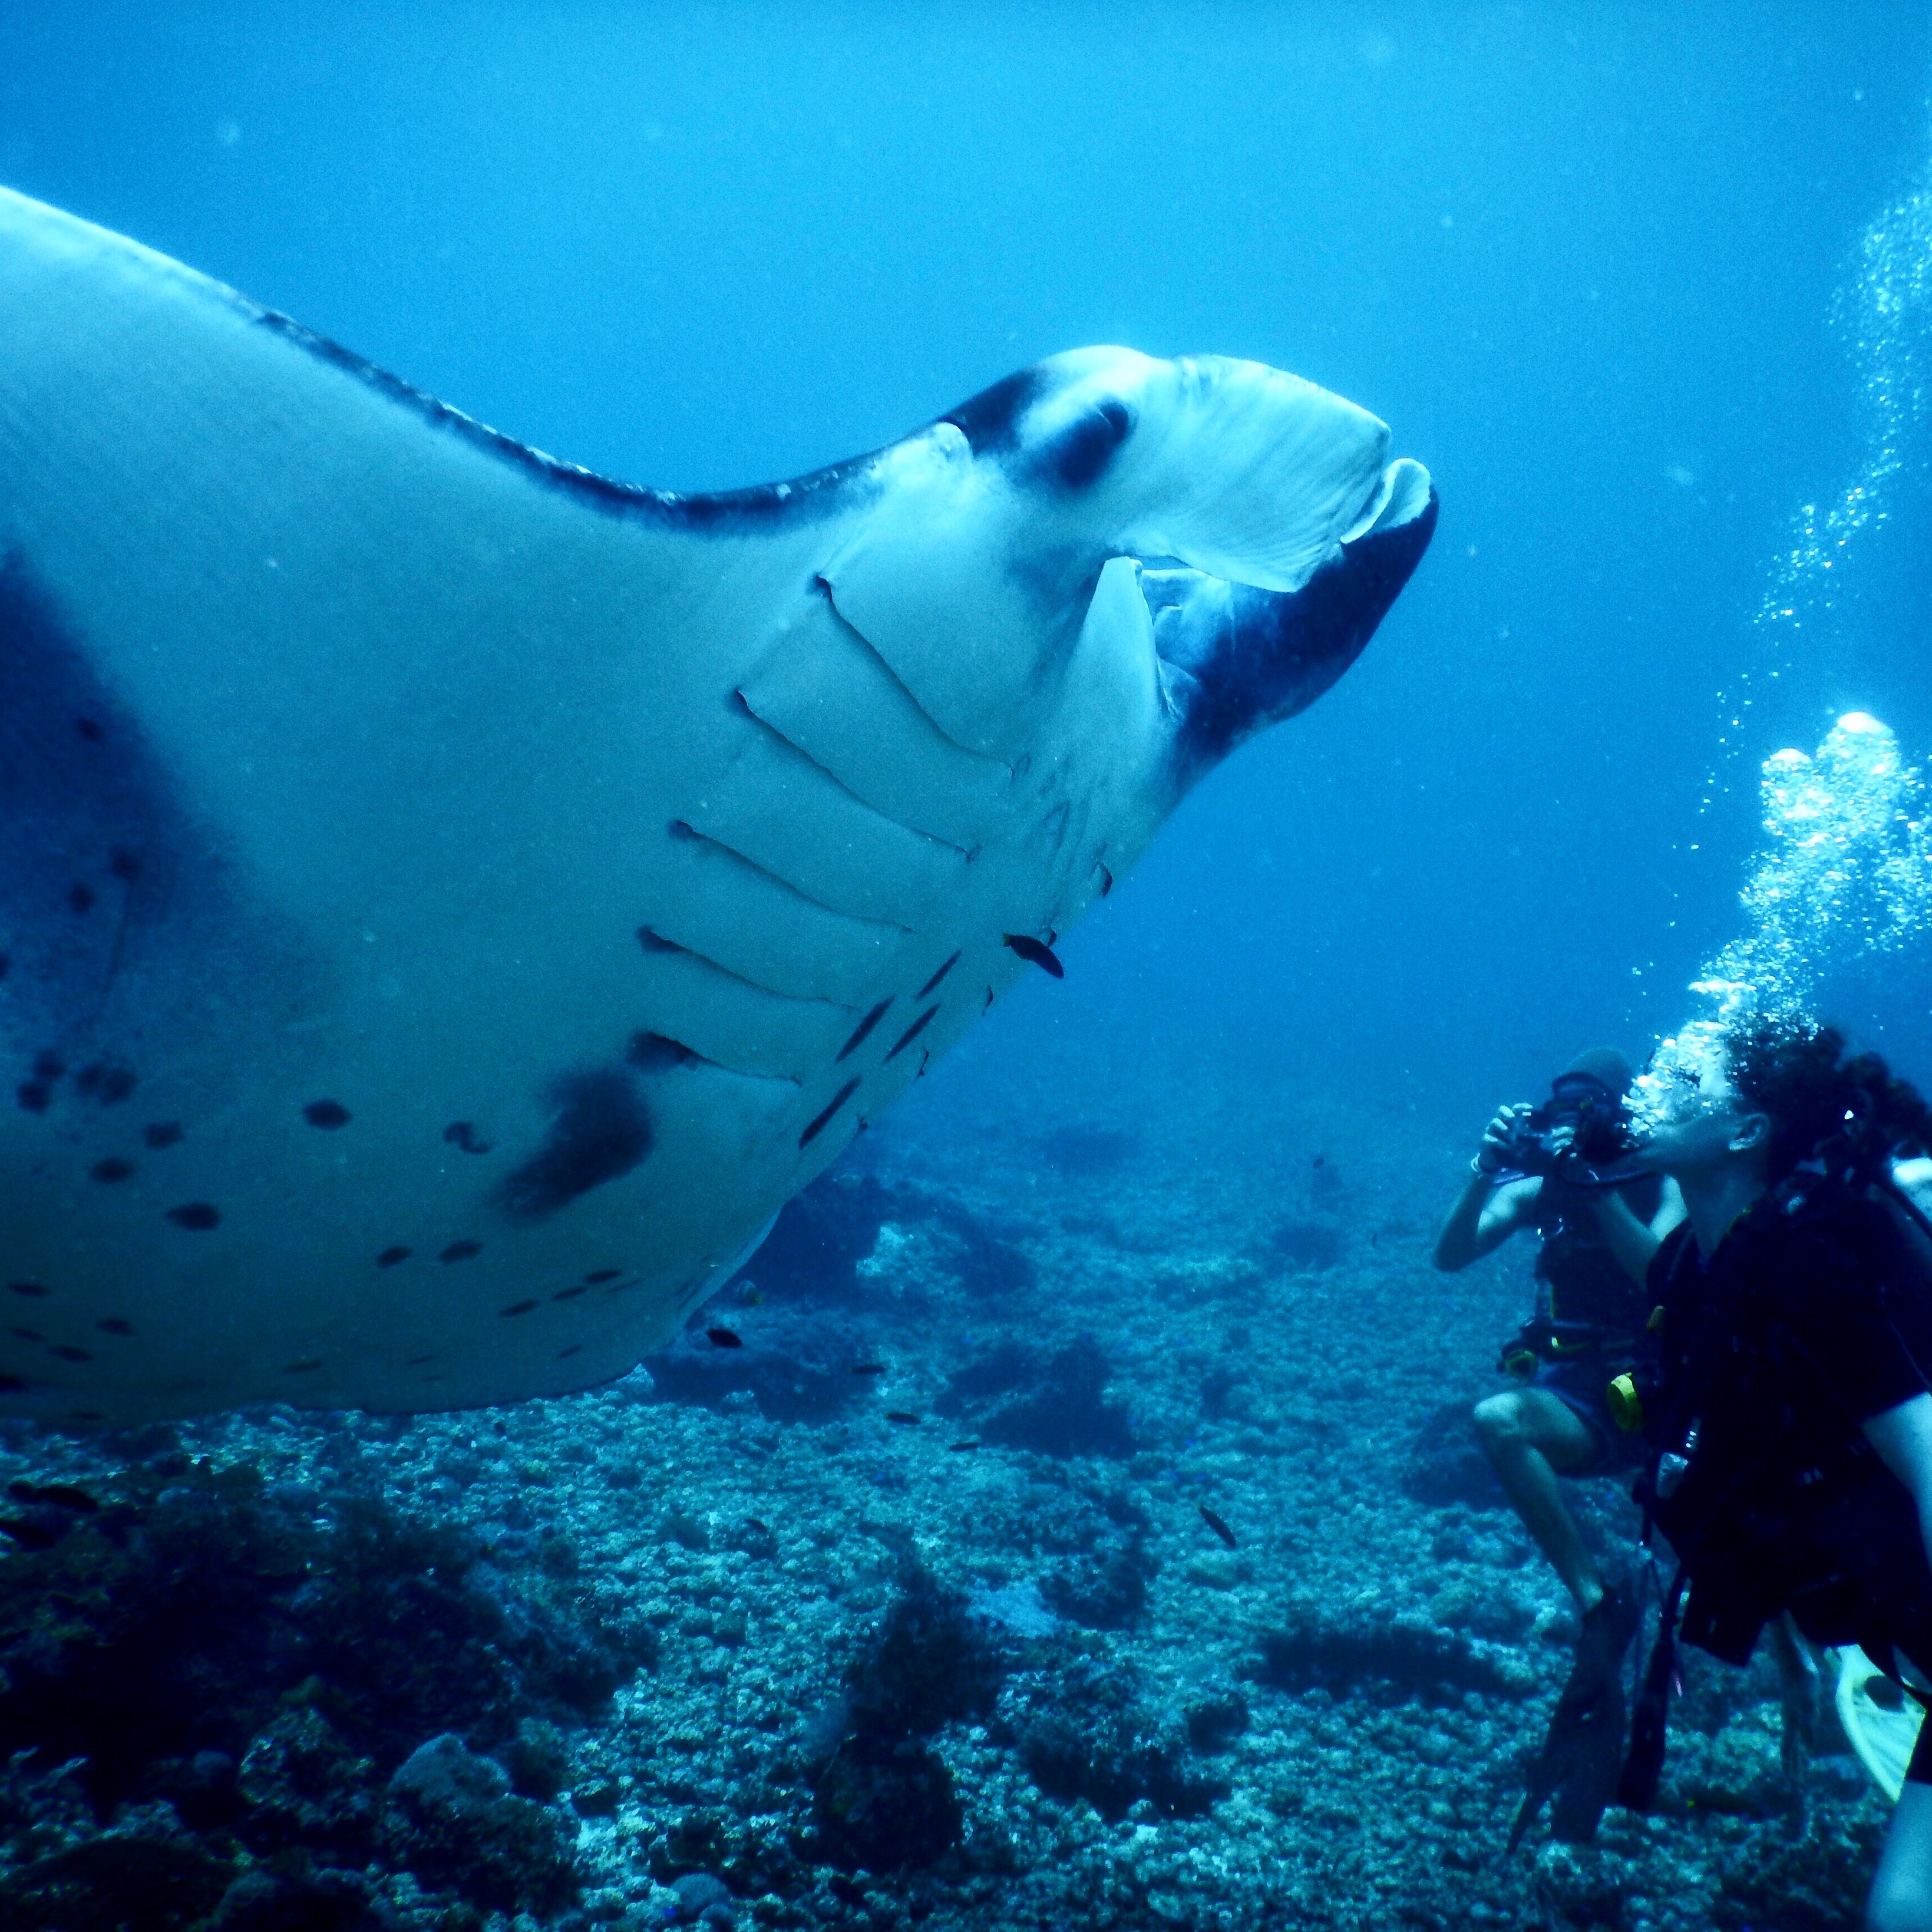 Manta ray getting very close to divers